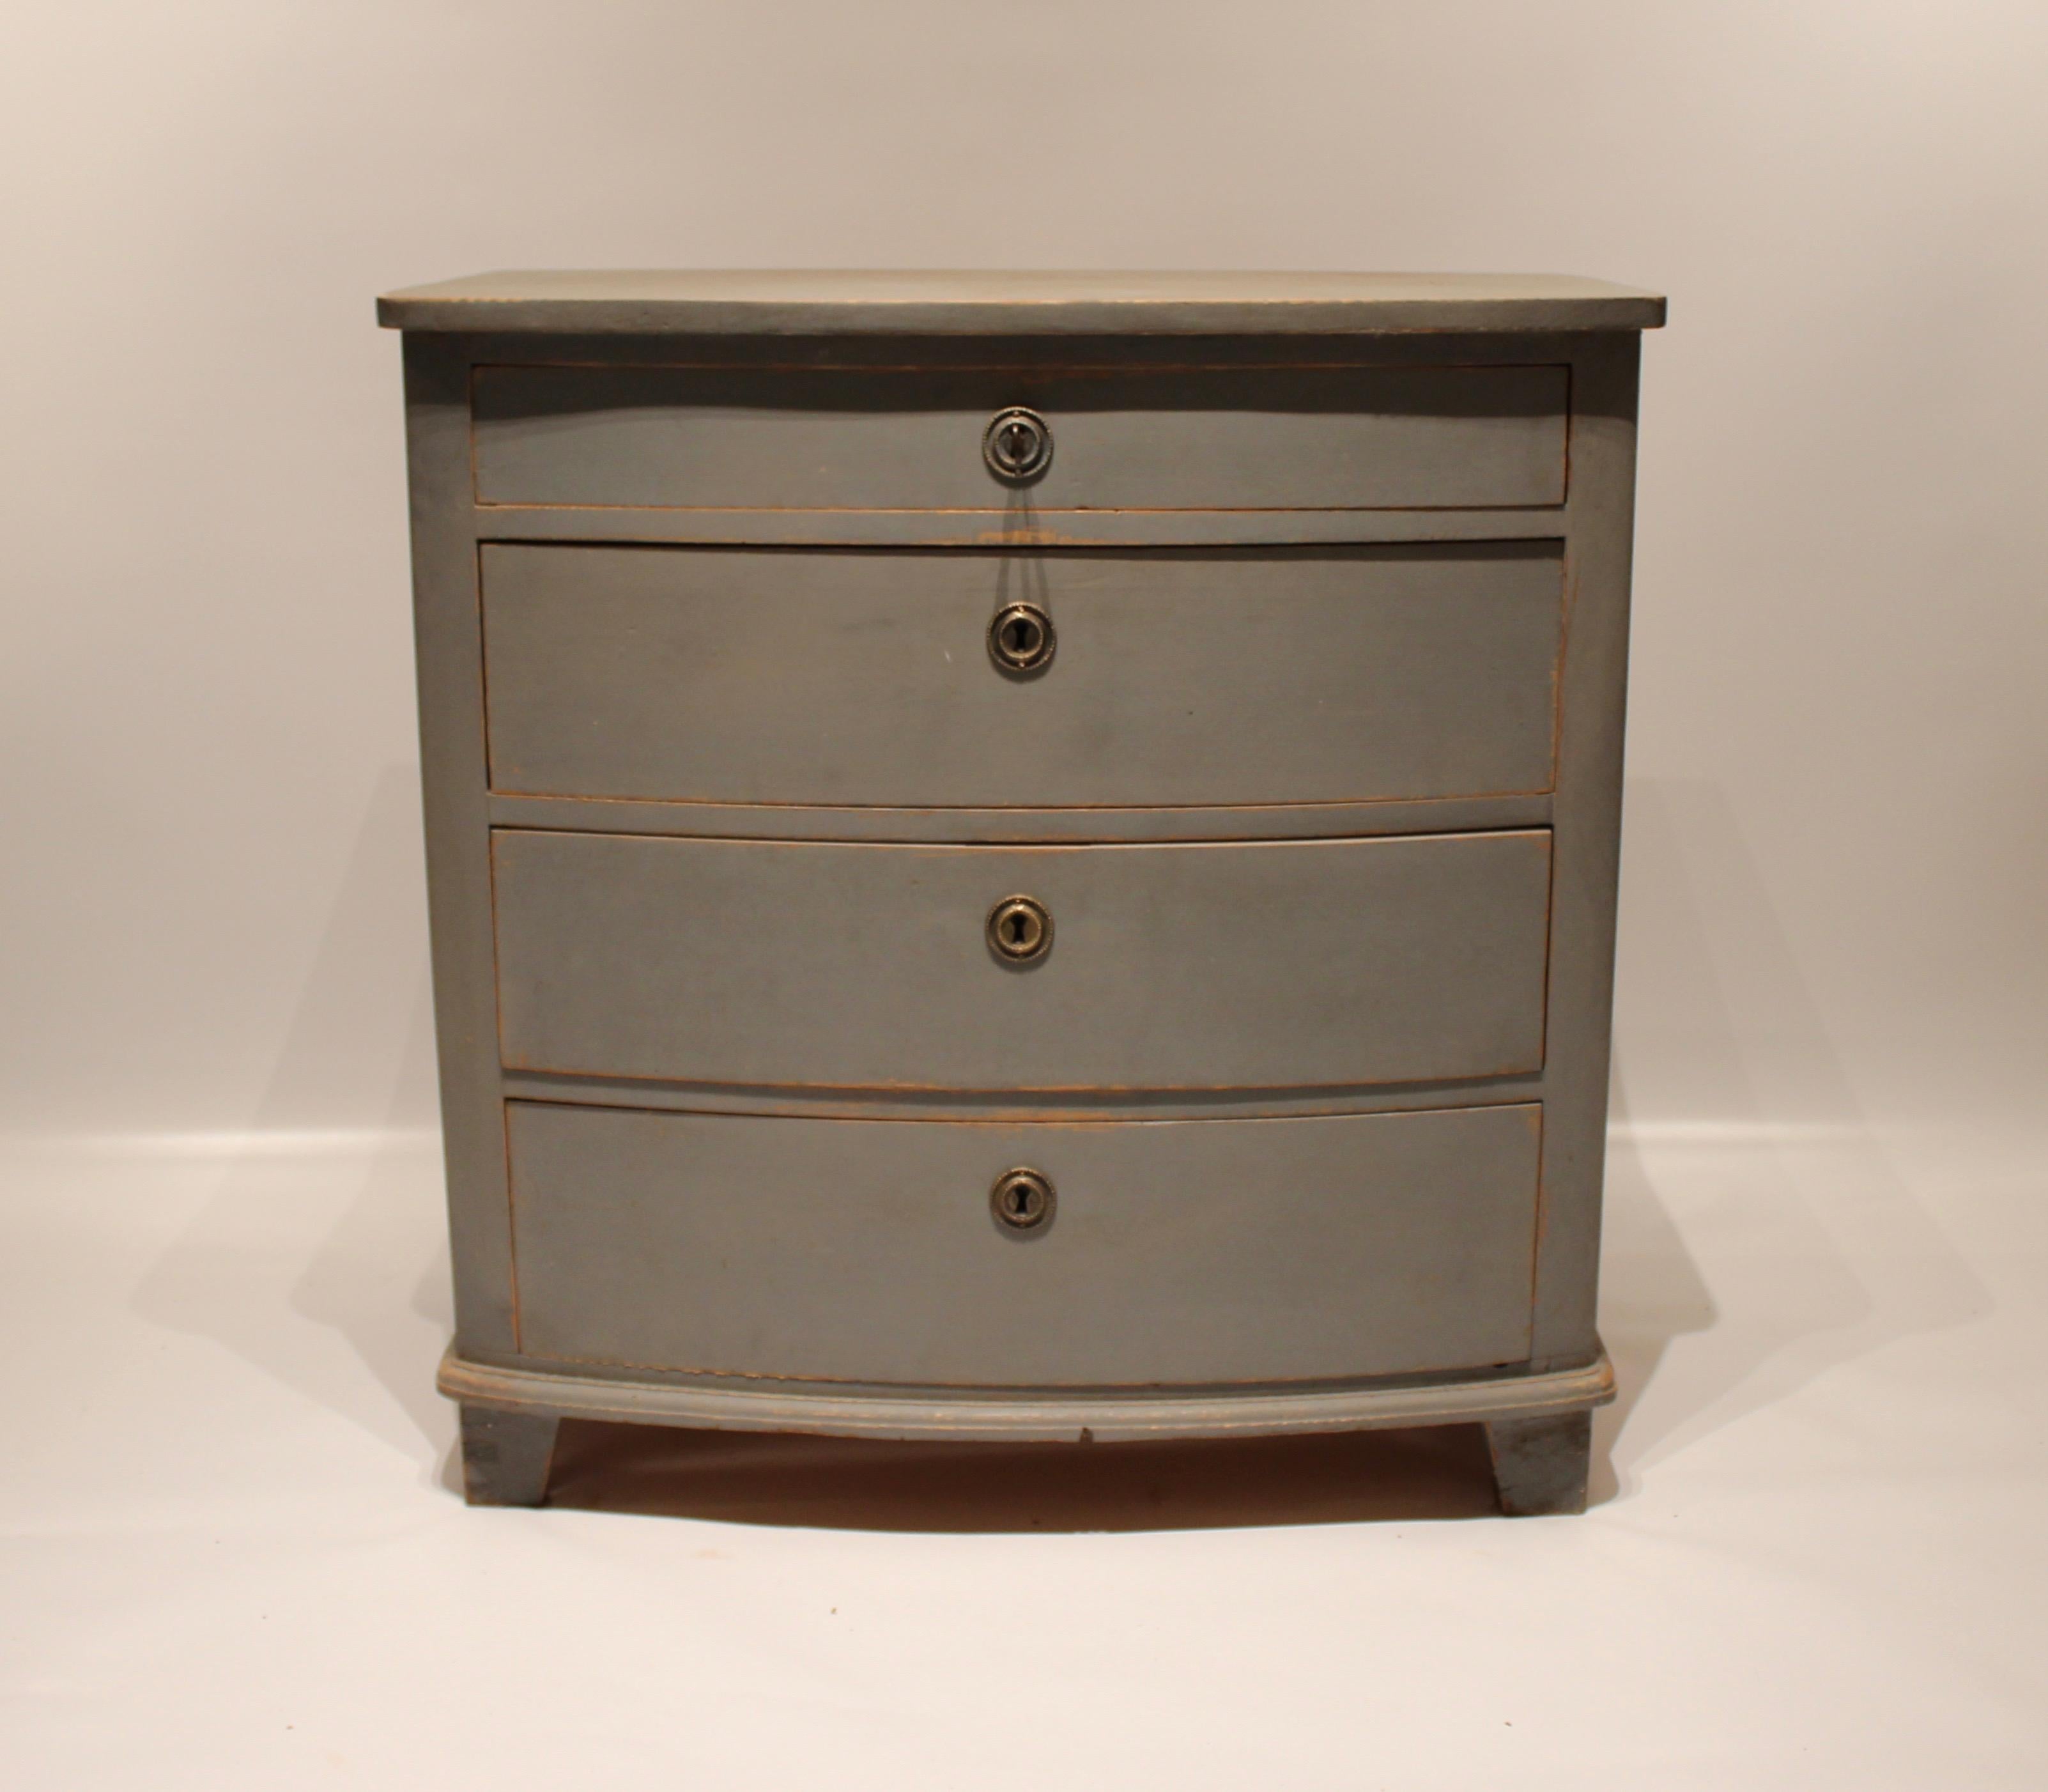 Grey painted chest of drawers in the style of Gustavian from the 1880s. The chest is in great vintage condition.